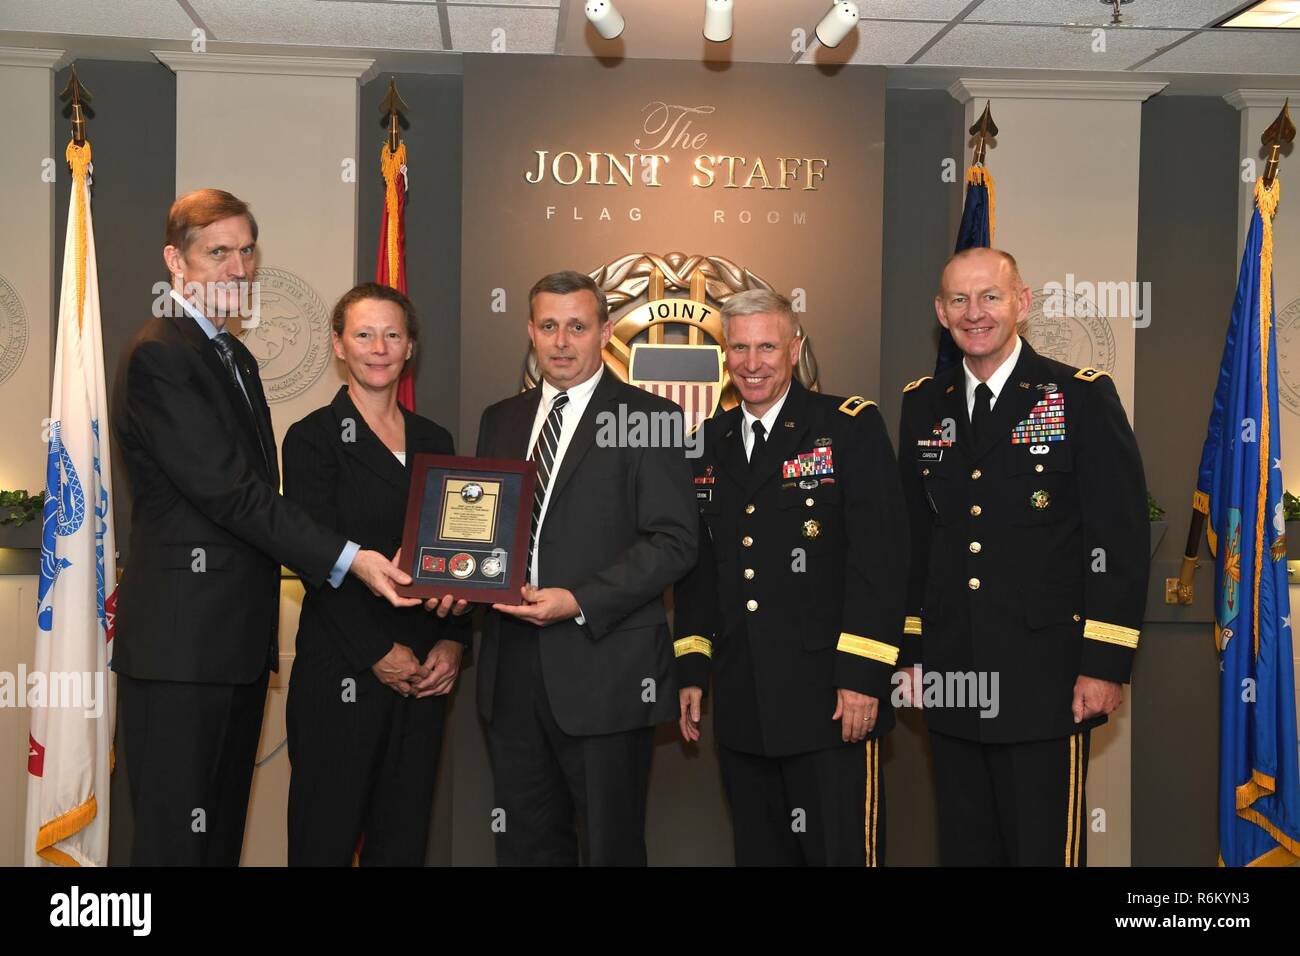 Karl F. Schneider (Left), senior career official performing the duties of the Under Secretary of the Army, host of the 2016 Lean Six Sigma excellence awards program ceremony May 18, 2017 at the Pentagon in Arlington, Va., poses with Diane Parks (Second from left), U.S. Army Corps of Engineers Nashville District chief of Operations, Tim Dunn (Third from left), Nashville District deputy chief of Operations, and Maj. Gen. Richard L. Stevens, (Fourth from left) U.S. Army Corps of Engineers deputy commanding general, and Lt. Gen. Edward C. Cardon, director of the Office of Business Transformation.  Stock Photo